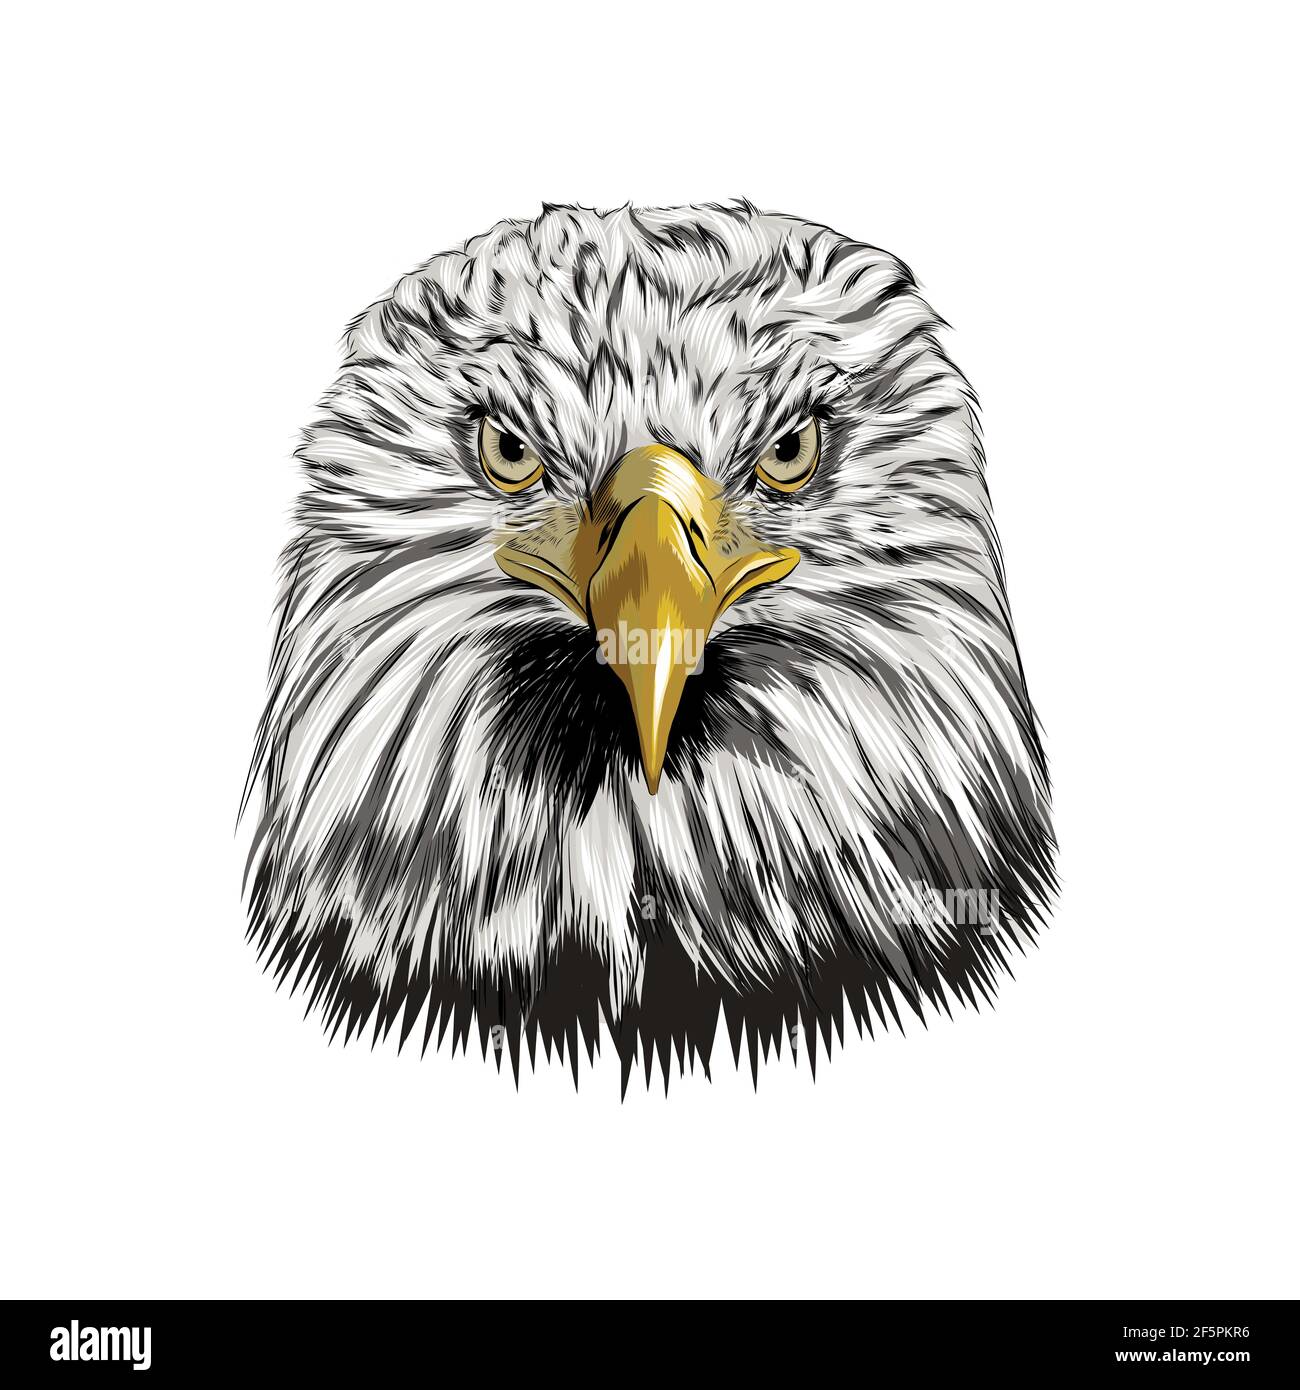 How To Sketch A Bald Eagle Step by Step Drawing Guide by makangeni   DragoArt